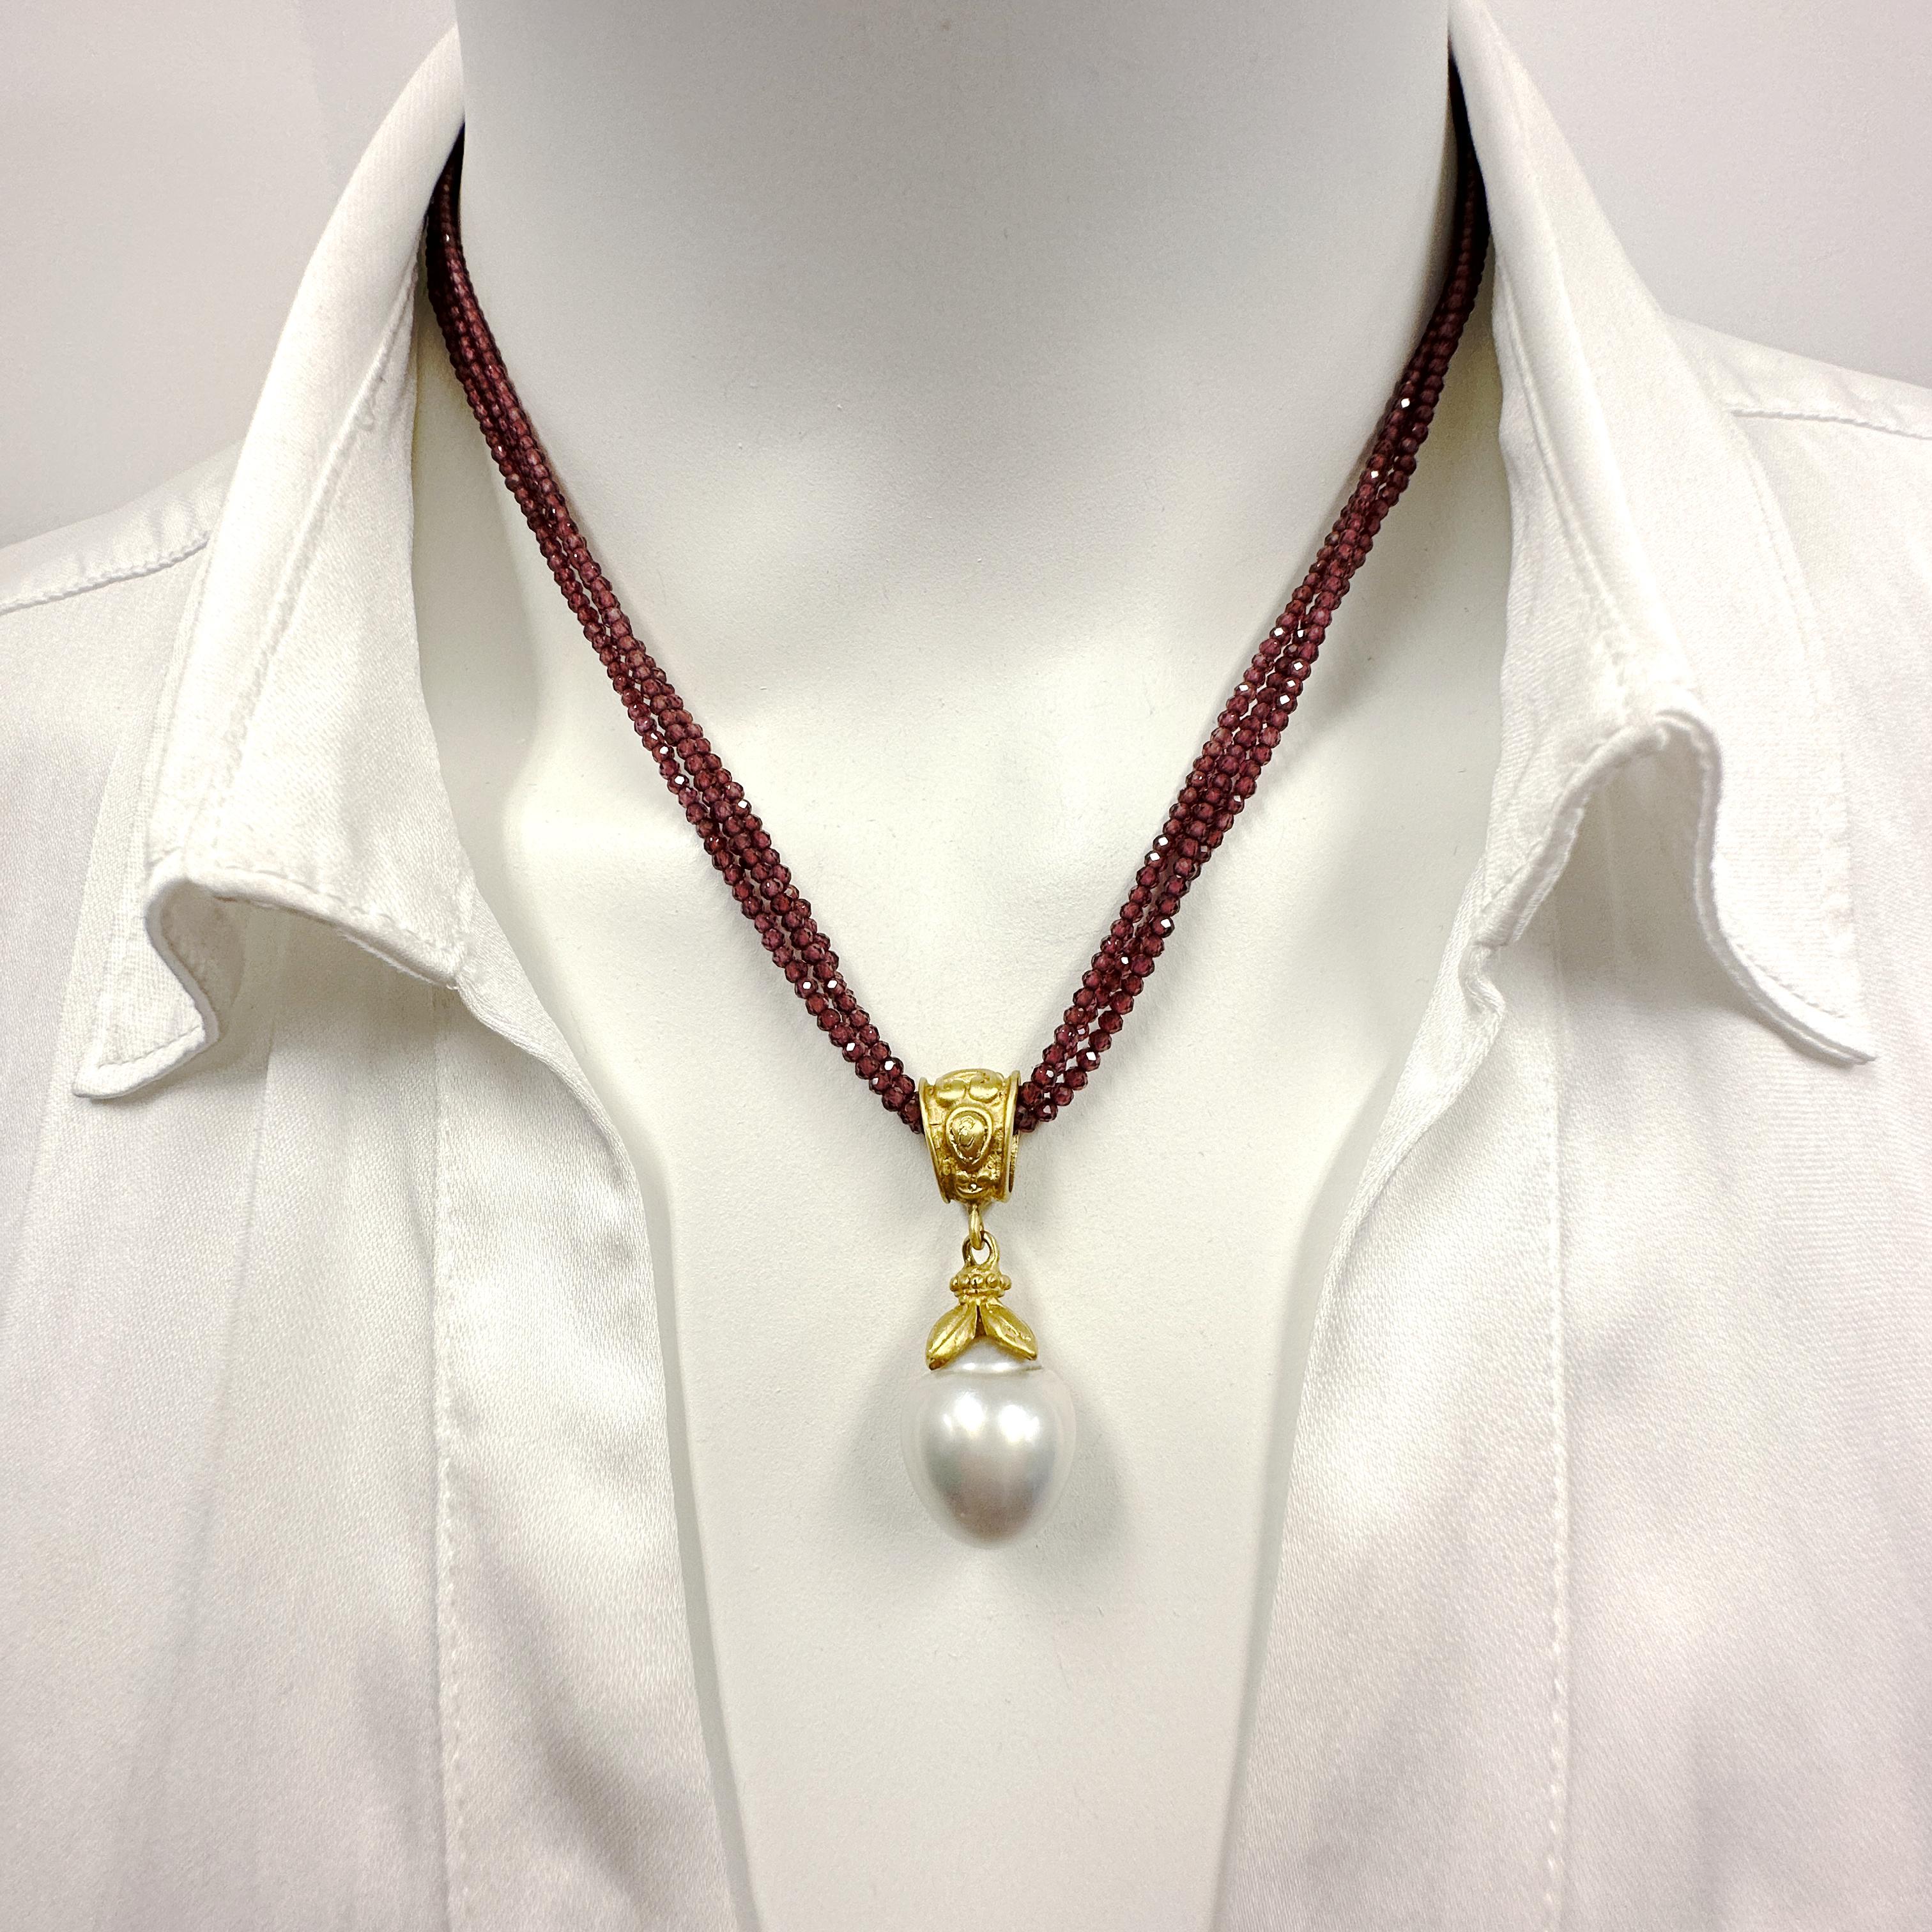 Baroque 13mm South Sea Pearl in 18K Gold Fob Pendant with Rhodolite Necklace For Sale 3